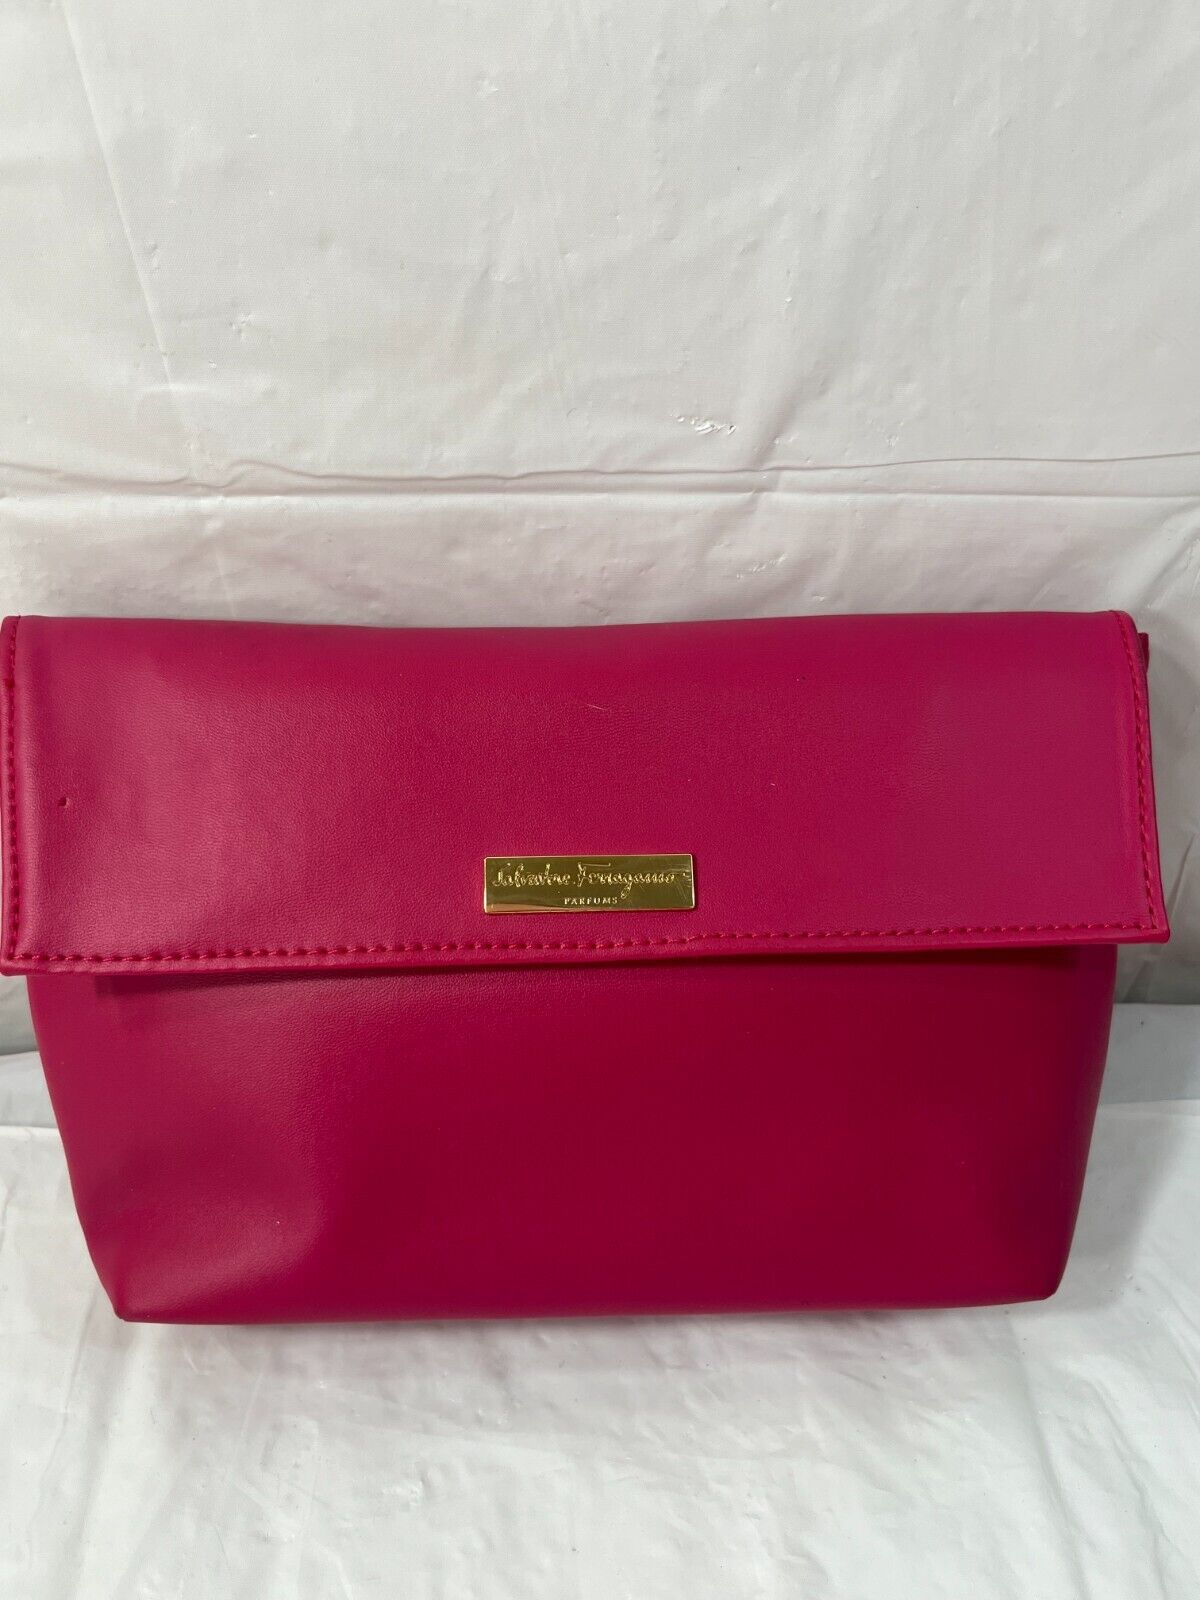 Salvatore Ferragamo Turkish Airlines Business Class Toiletry Amenity Bag pink